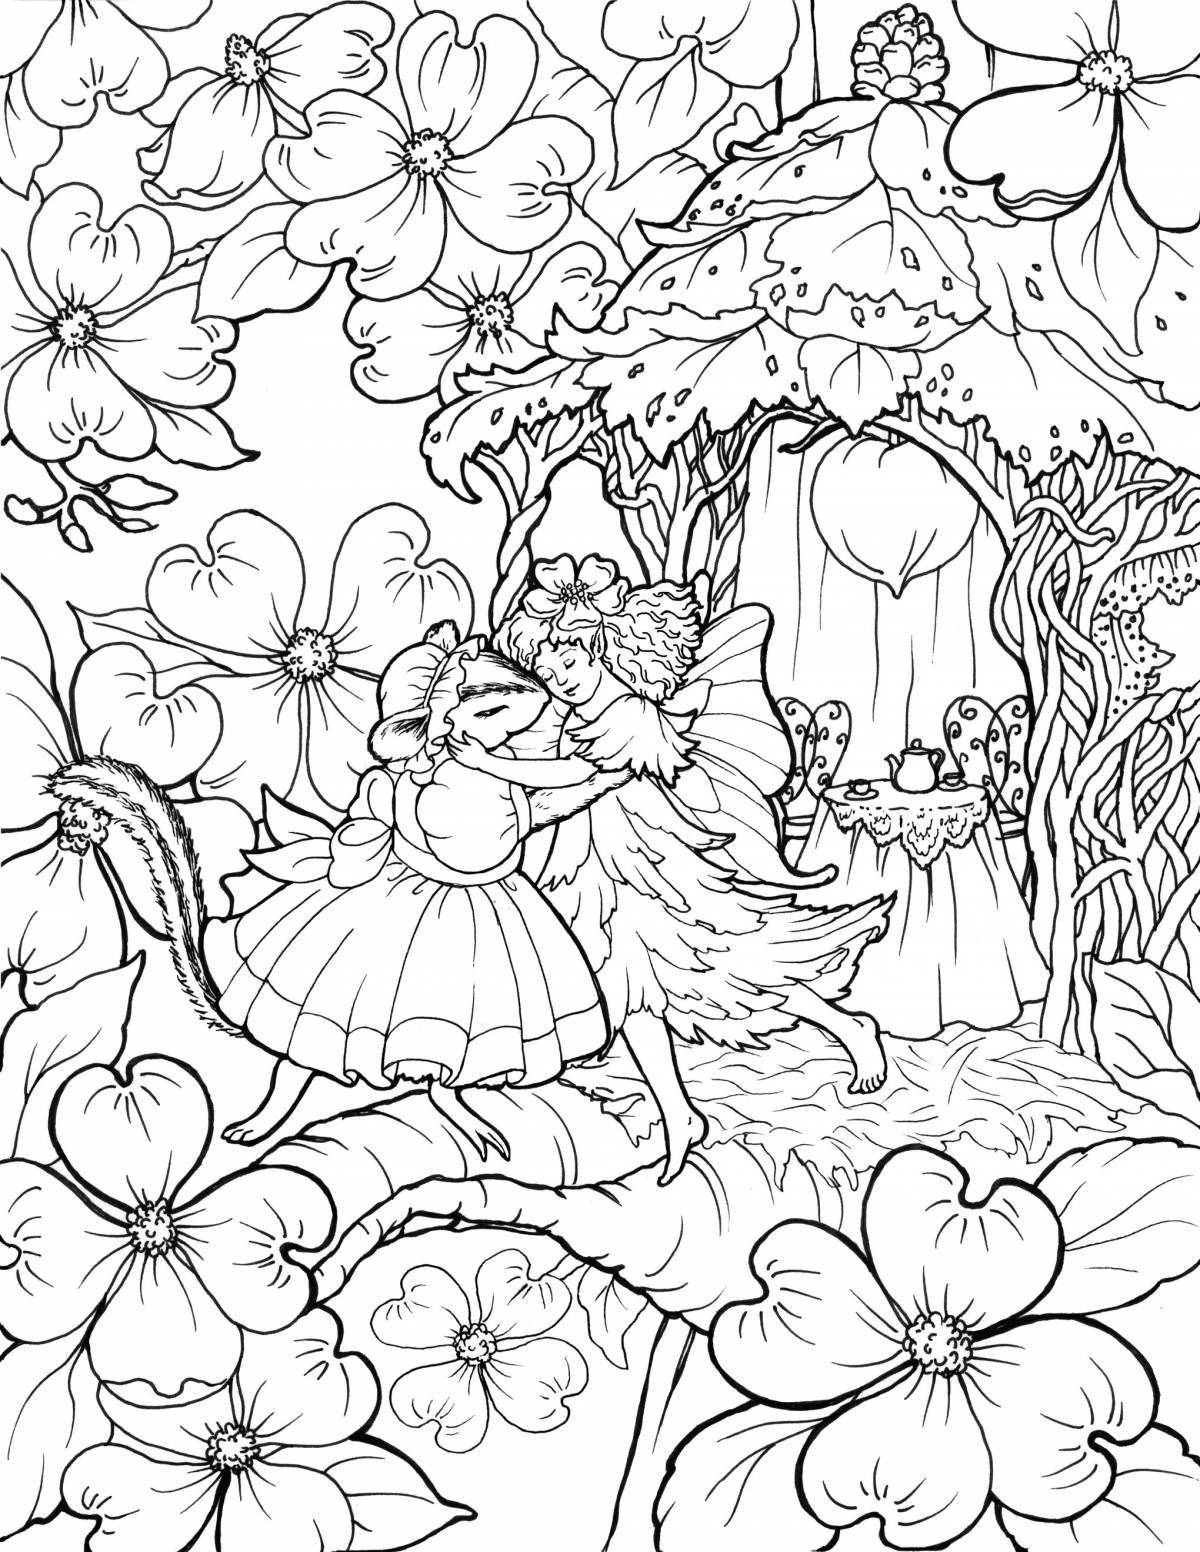 Coloring-adventure coloring page